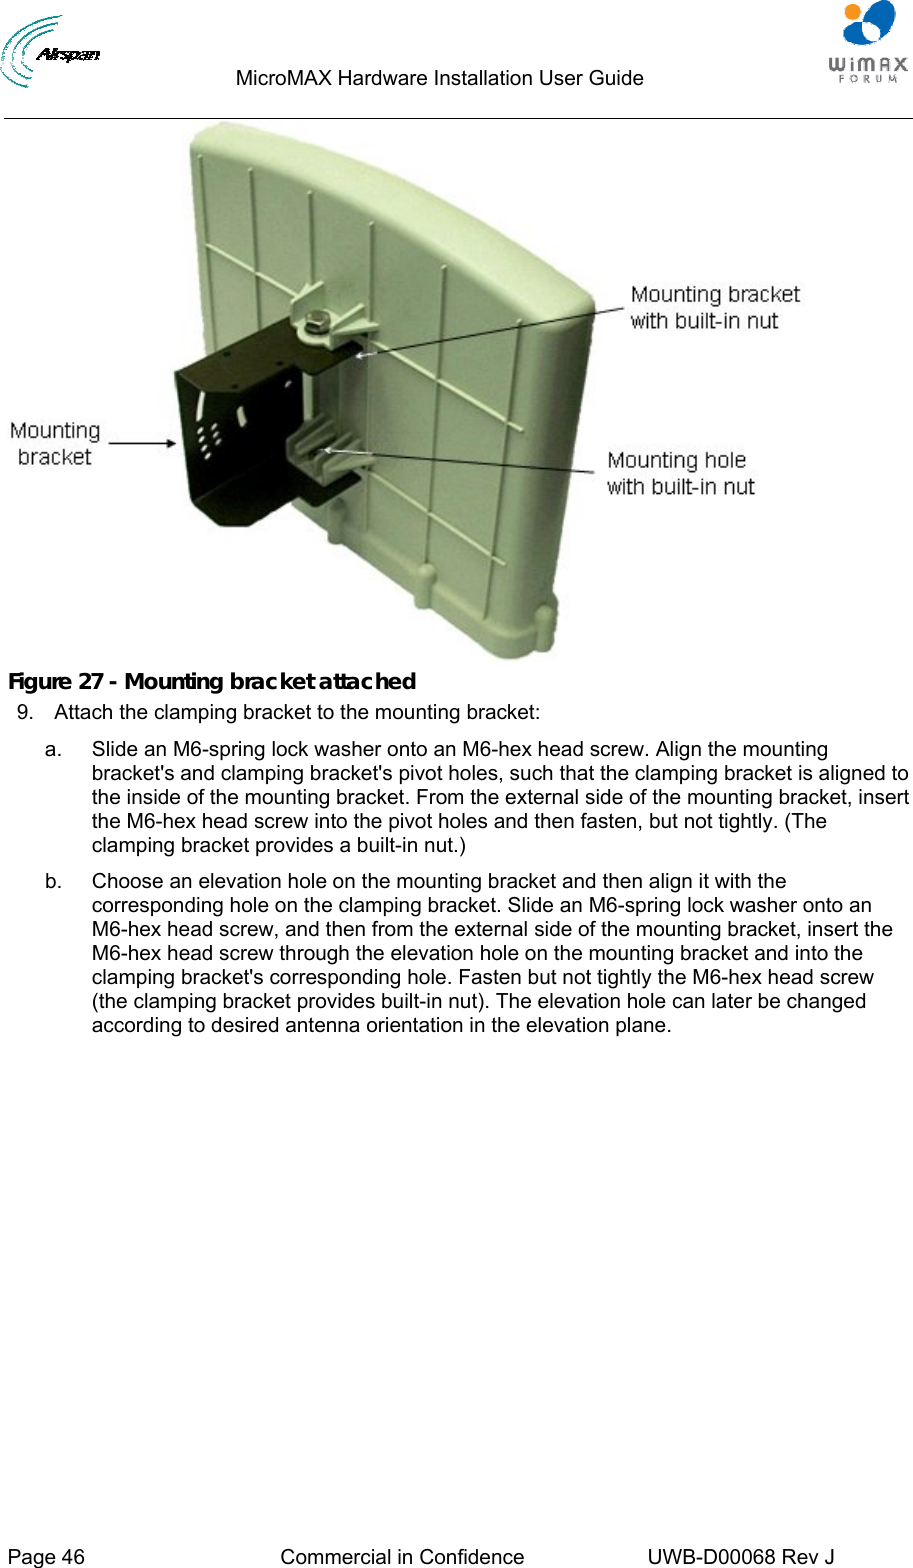                                  MicroMAX Hardware Installation User Guide     Page 46  Commercial in Confidence  UWB-D00068 Rev J    Figure 27 - Mounting bracket attached 9.  Attach the clamping bracket to the mounting bracket: a.  Slide an M6-spring lock washer onto an M6-hex head screw. Align the mounting bracket&apos;s and clamping bracket&apos;s pivot holes, such that the clamping bracket is aligned to the inside of the mounting bracket. From the external side of the mounting bracket, insert the M6-hex head screw into the pivot holes and then fasten, but not tightly. (The clamping bracket provides a built-in nut.) b.  Choose an elevation hole on the mounting bracket and then align it with the corresponding hole on the clamping bracket. Slide an M6-spring lock washer onto an M6-hex head screw, and then from the external side of the mounting bracket, insert the M6-hex head screw through the elevation hole on the mounting bracket and into the clamping bracket&apos;s corresponding hole. Fasten but not tightly the M6-hex head screw (the clamping bracket provides built-in nut). The elevation hole can later be changed according to desired antenna orientation in the elevation plane. 